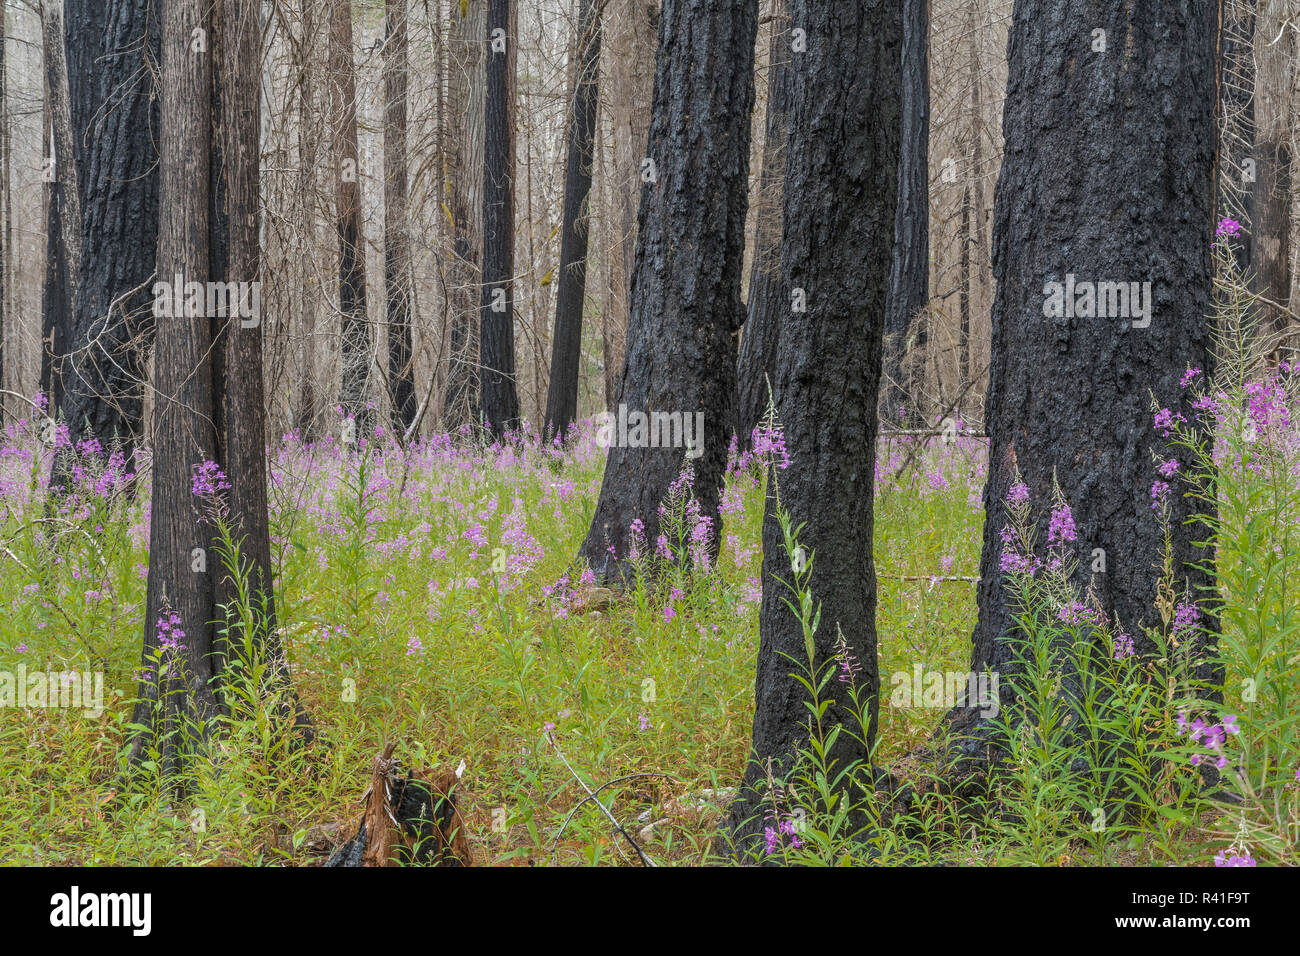 Fireweed blooming after a forest fire. Washington State, North Cascades National Park. Stock Photo